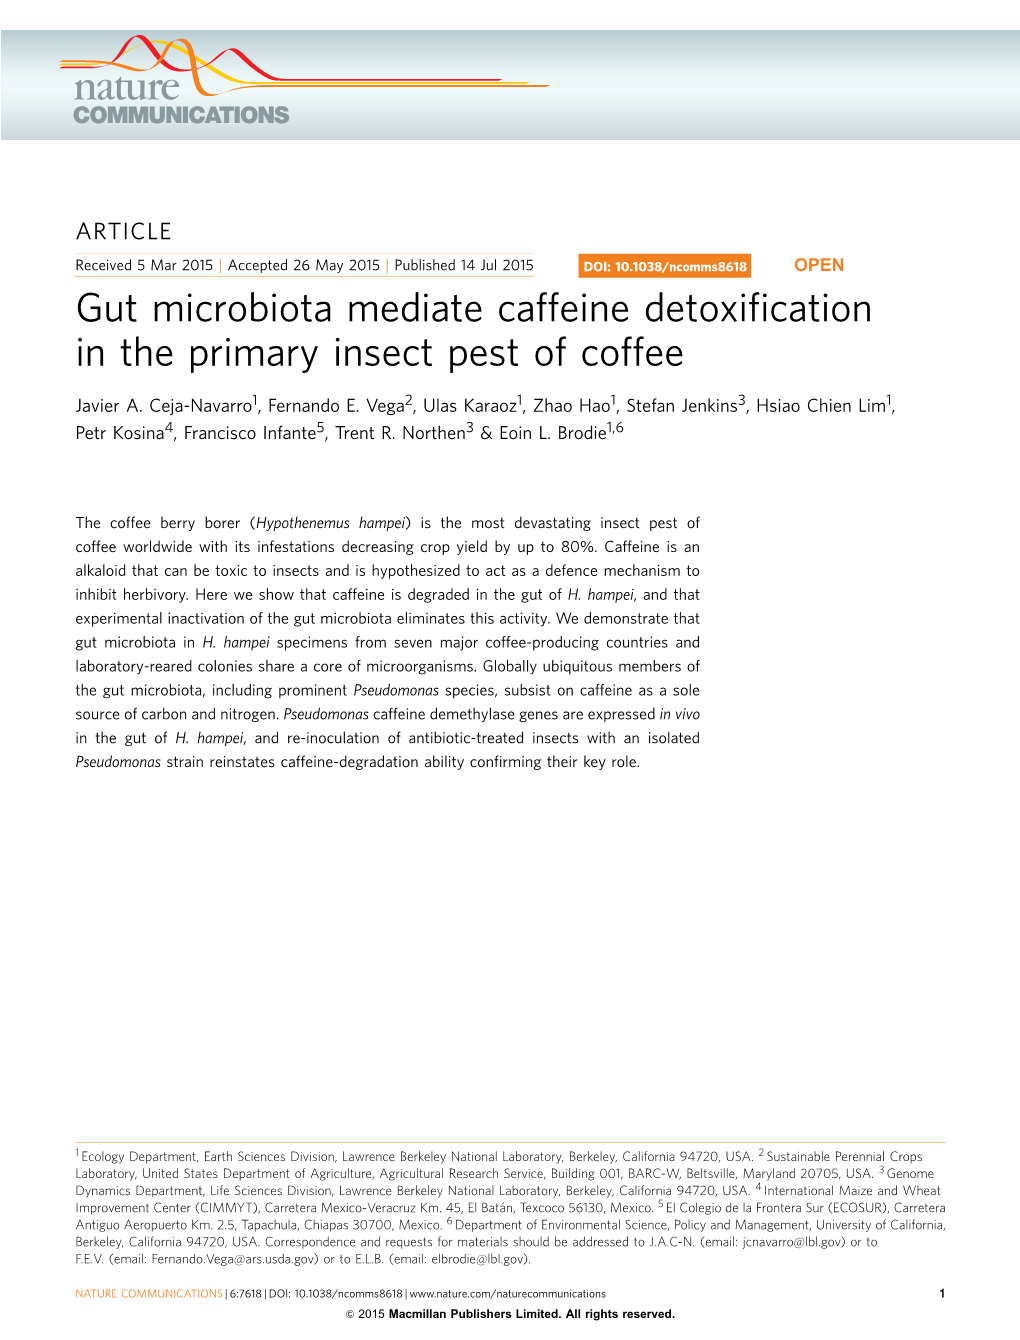 Gut Microbiota Mediate Caffeine Detoxification in the Primary Insect